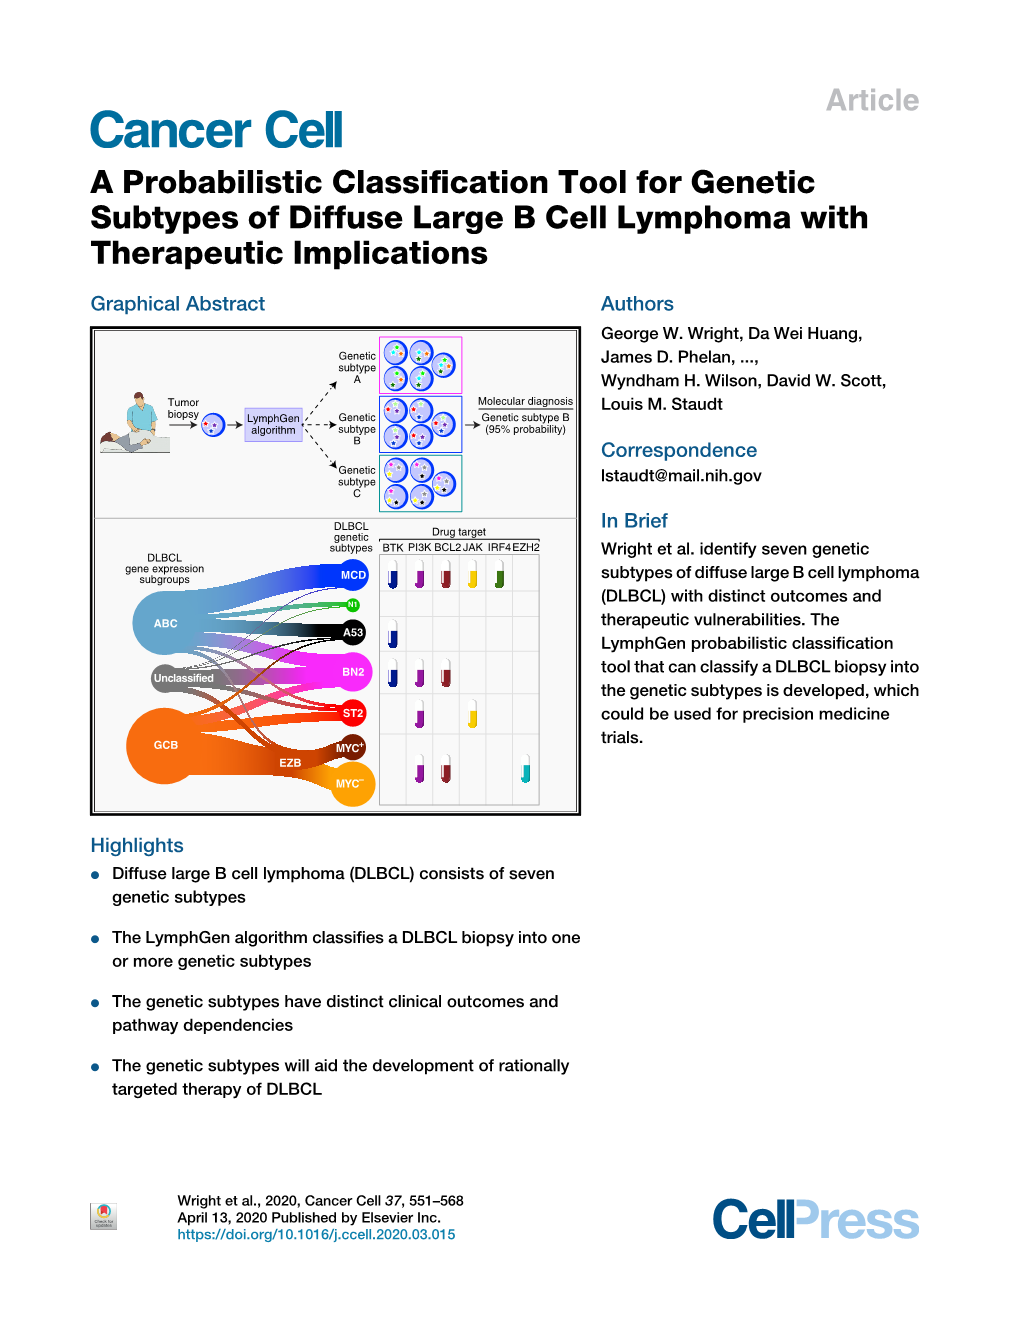 A Probabilistic Classification Tool for Genetic Subtypes of Diffuse Large